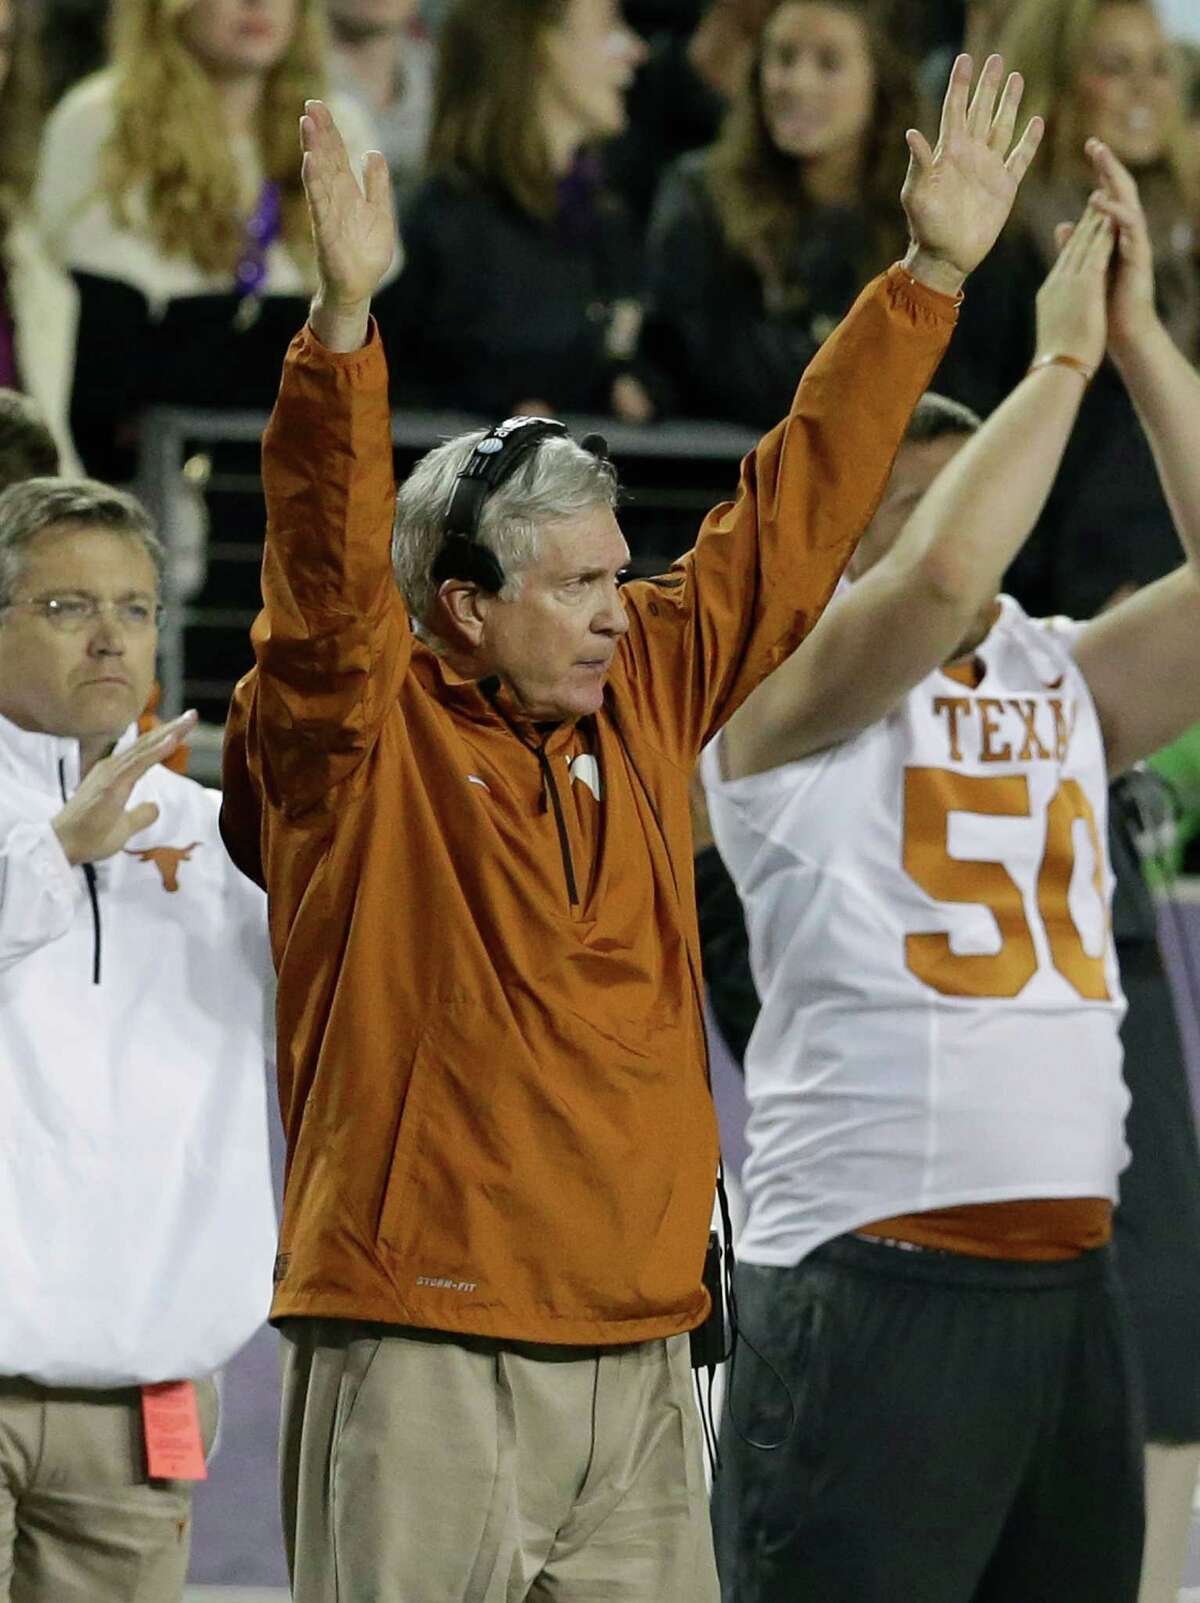 Texas head coach Mack Brown celebrates his team scoring a field goal during the second half of an NCAA college football game against TCU Sunday, Oct. 27, 2013, in Fort Worth, Texas. (AP Photo/LM Otero)